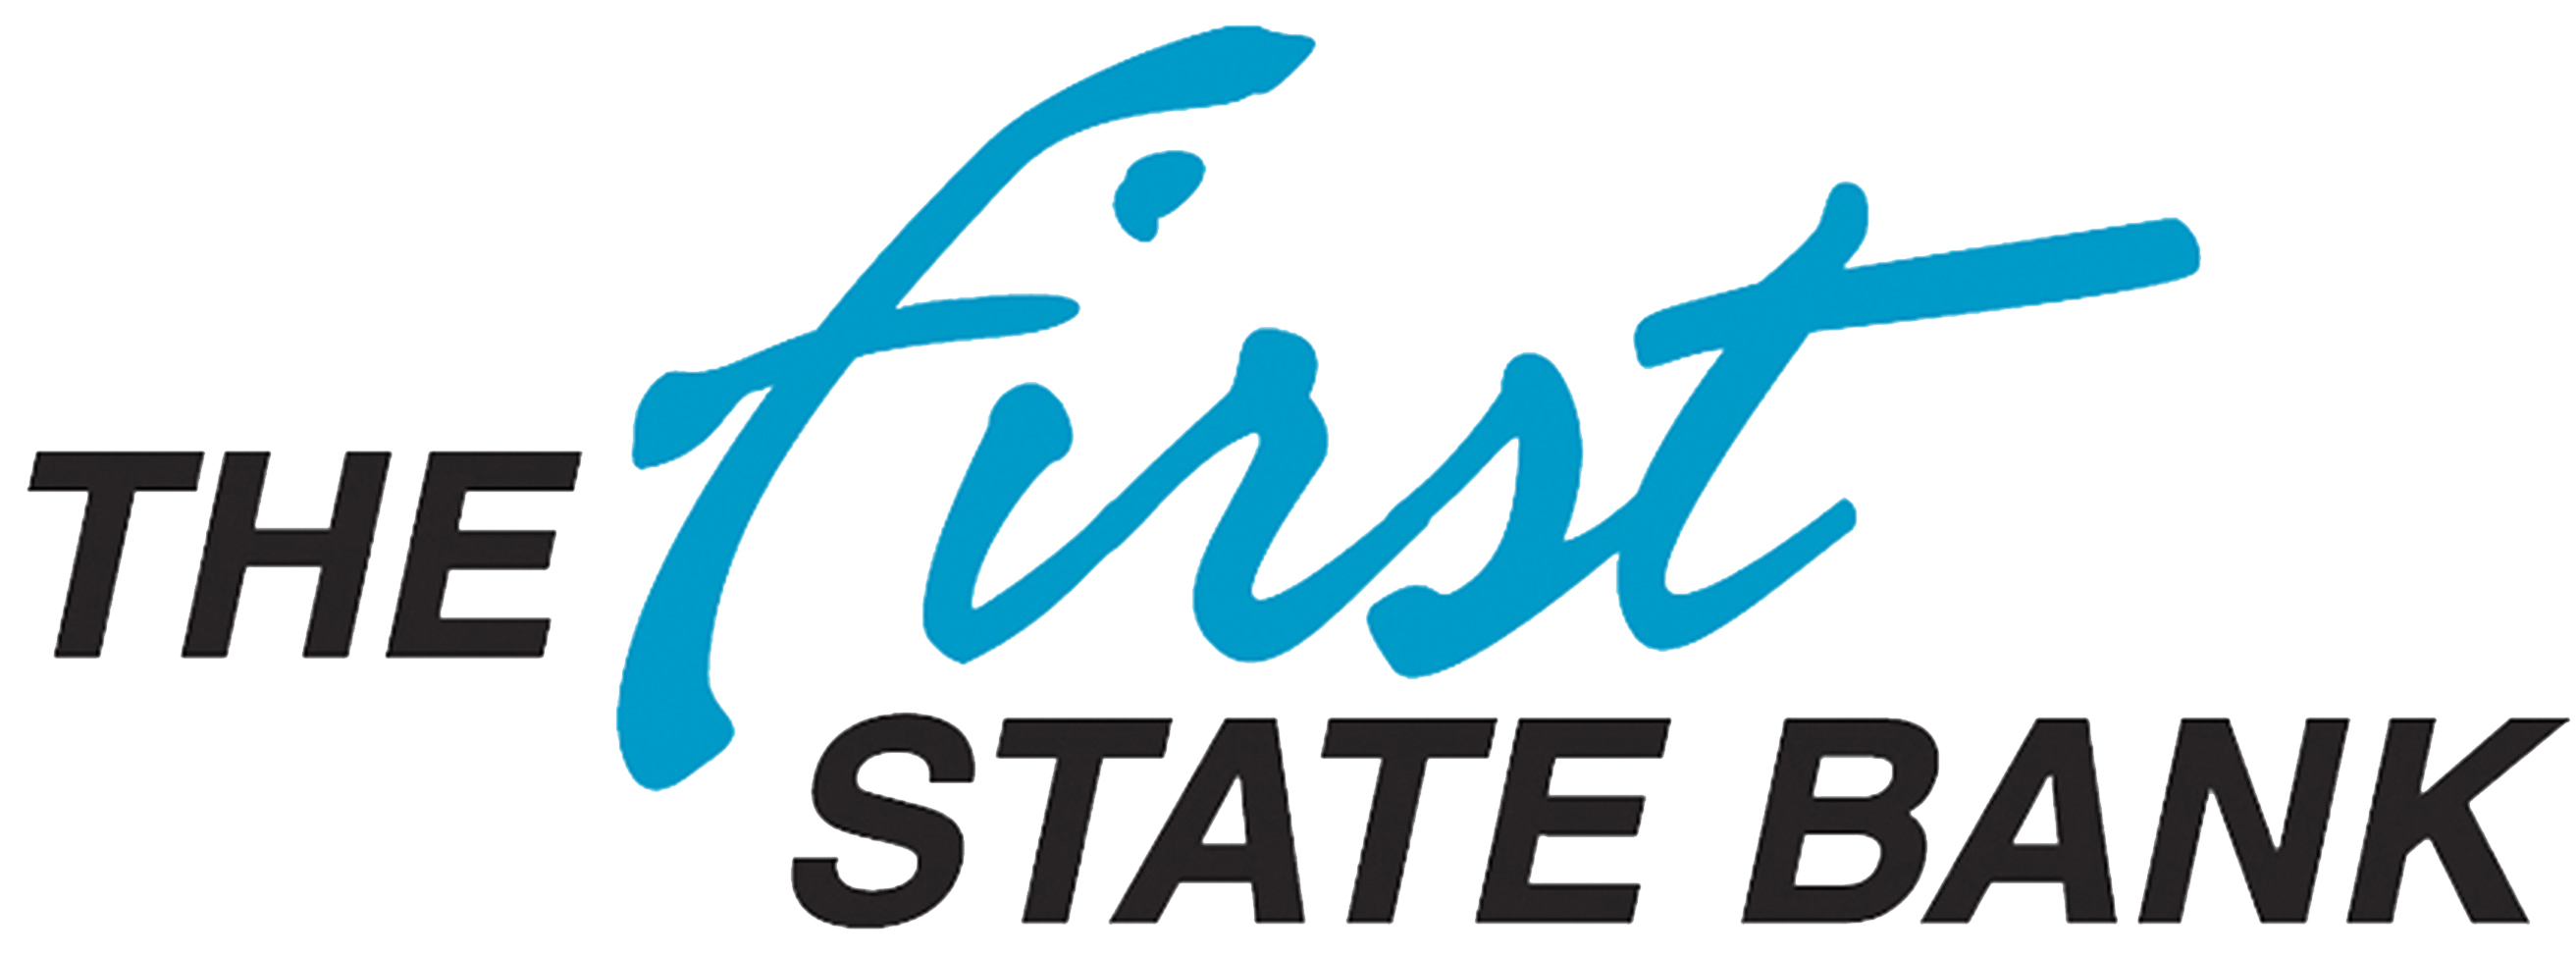 The First State Bank logo